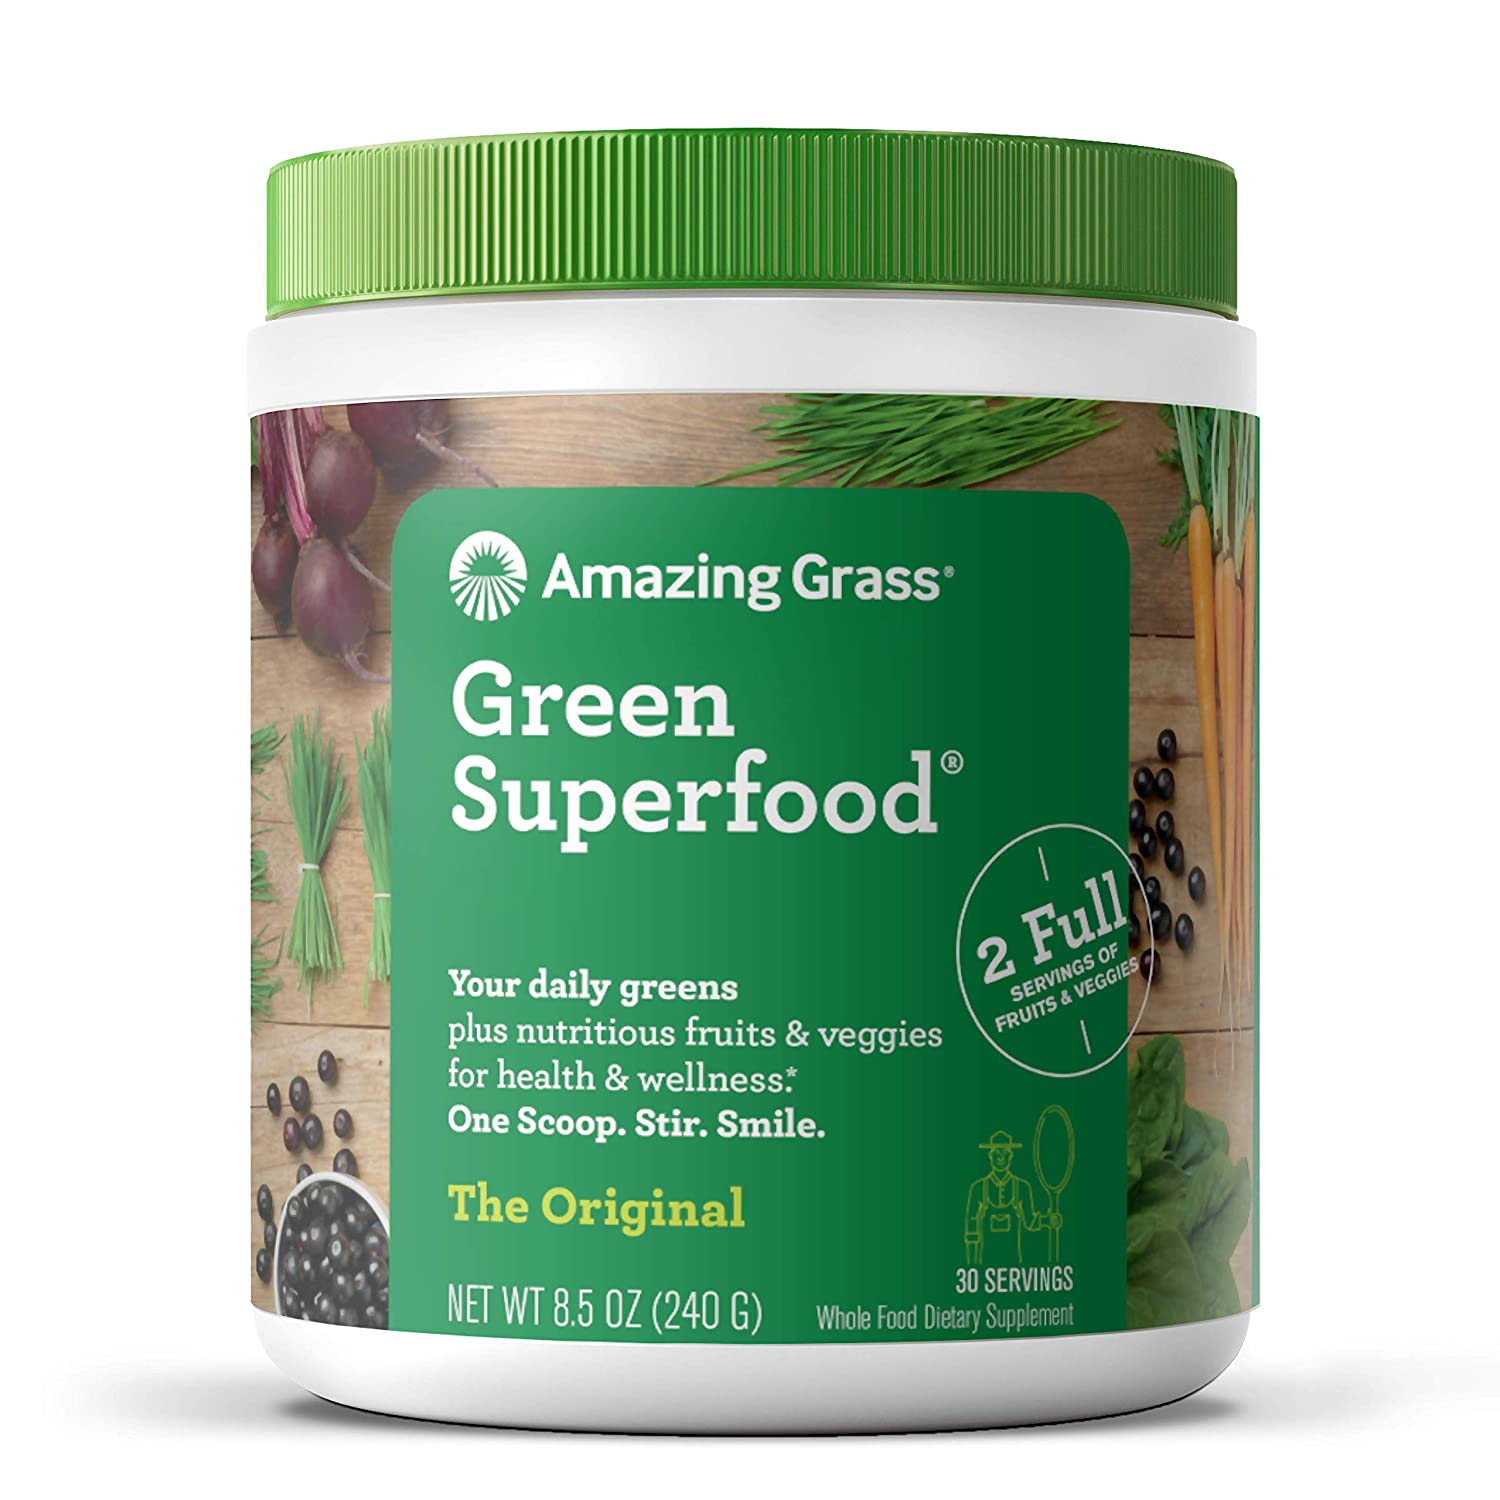 Amazing Grass Green Superfood - Fruits and vegetables supplements - Top 10 organic supplements natural